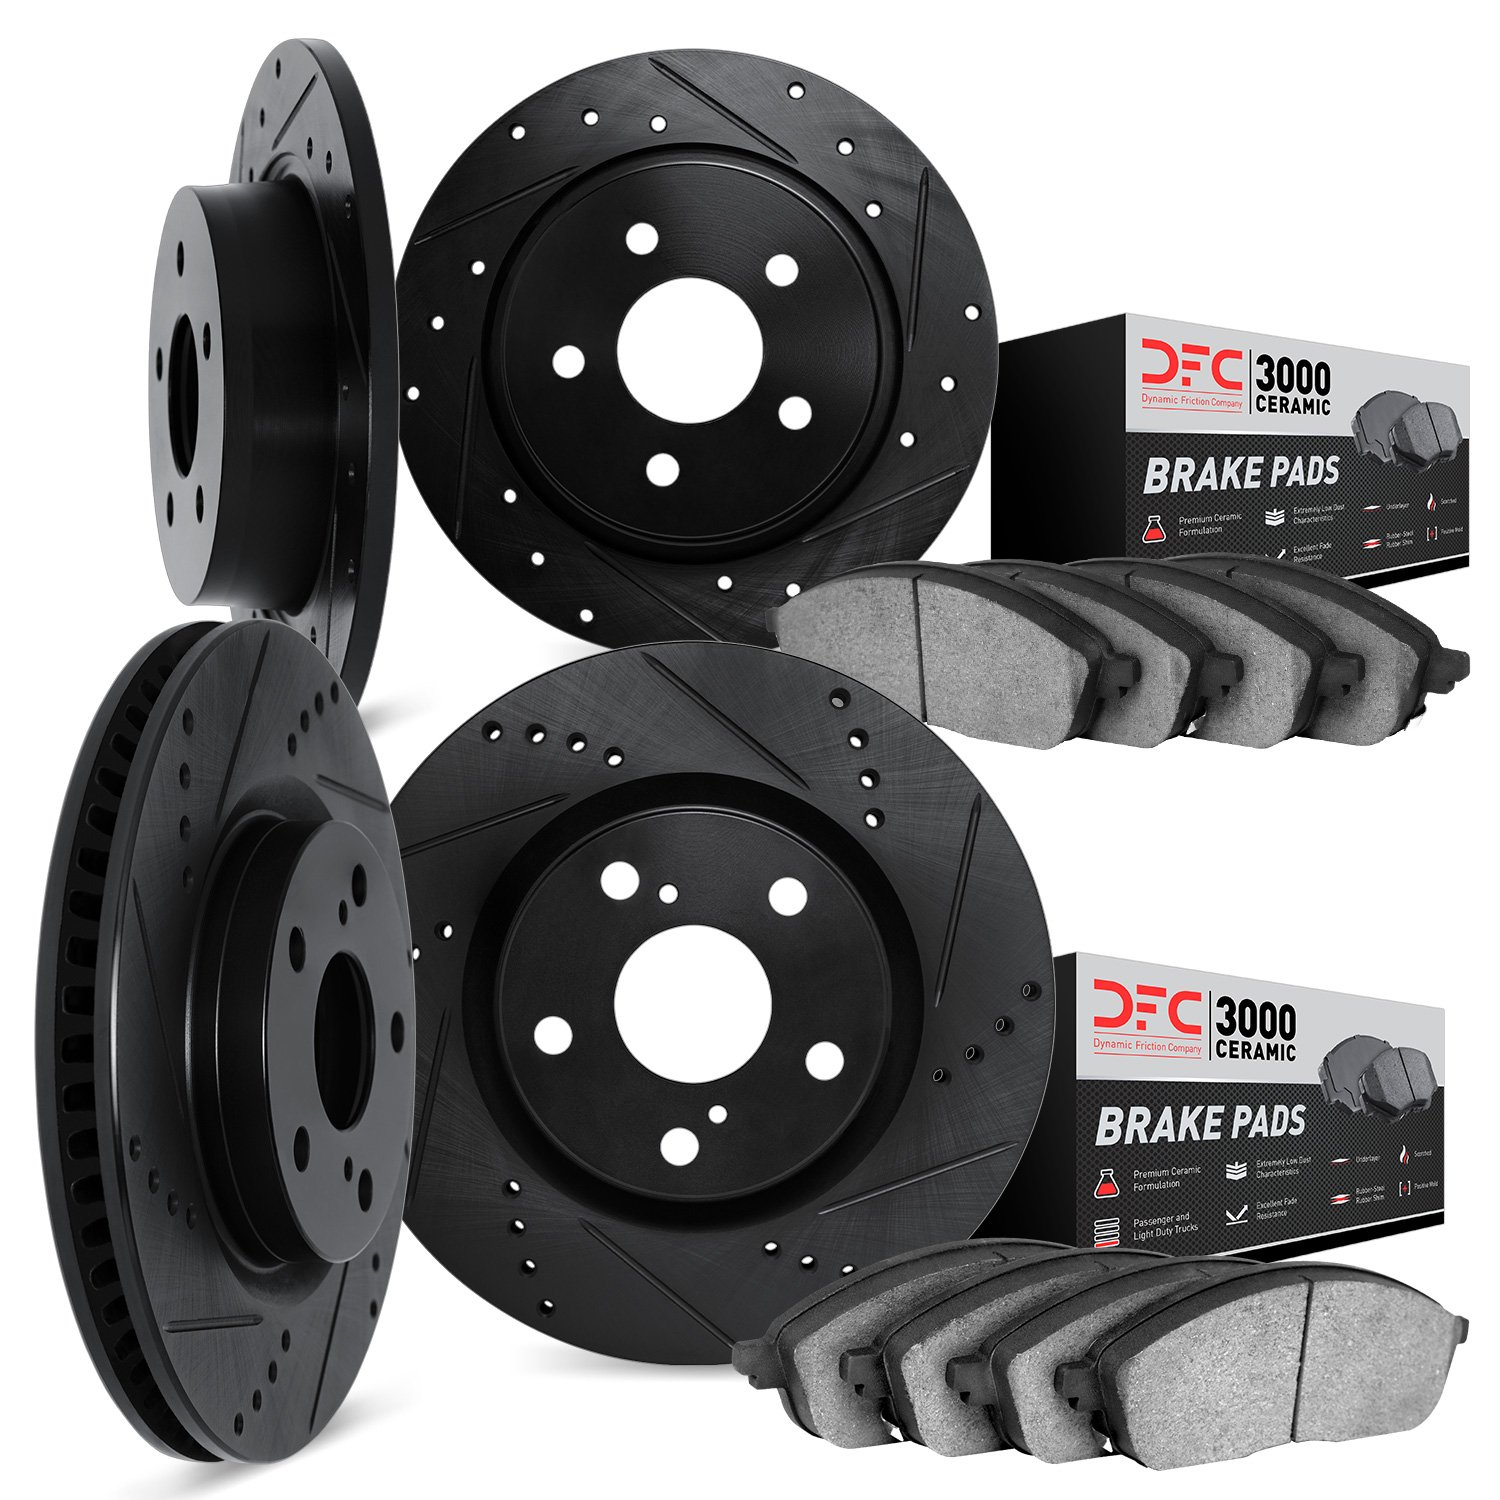 8304-59045 Drilled/Slotted Brake Rotors with 3000-Series Ceramic Brake Pads Kit [Black], 2012-2016 Acura/Honda, Position: Front